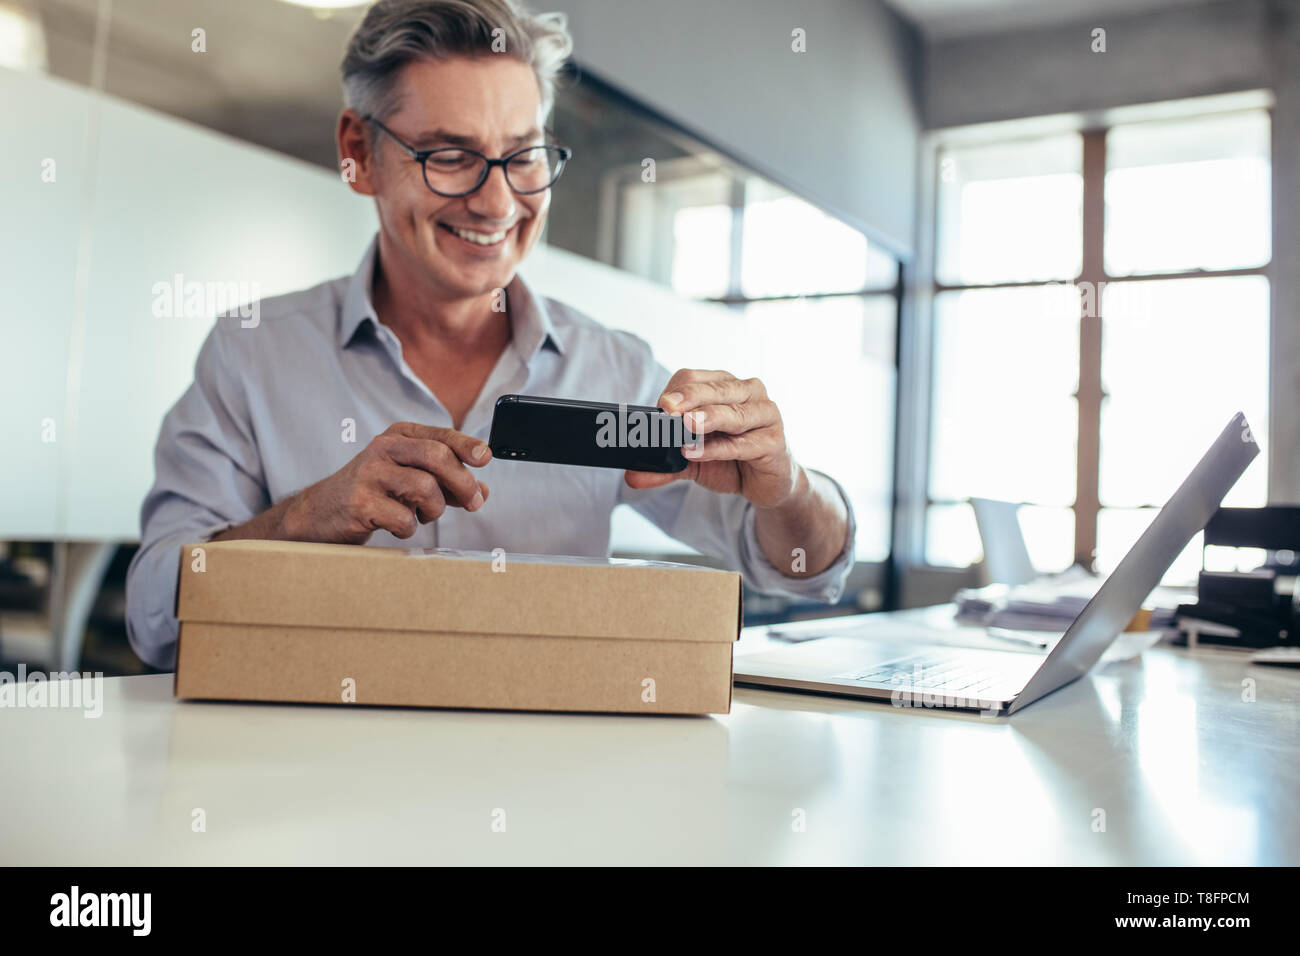 Smiling mid adult man taking scanning a delivery box on his desk. Man taking picture of a package. Stock Photo